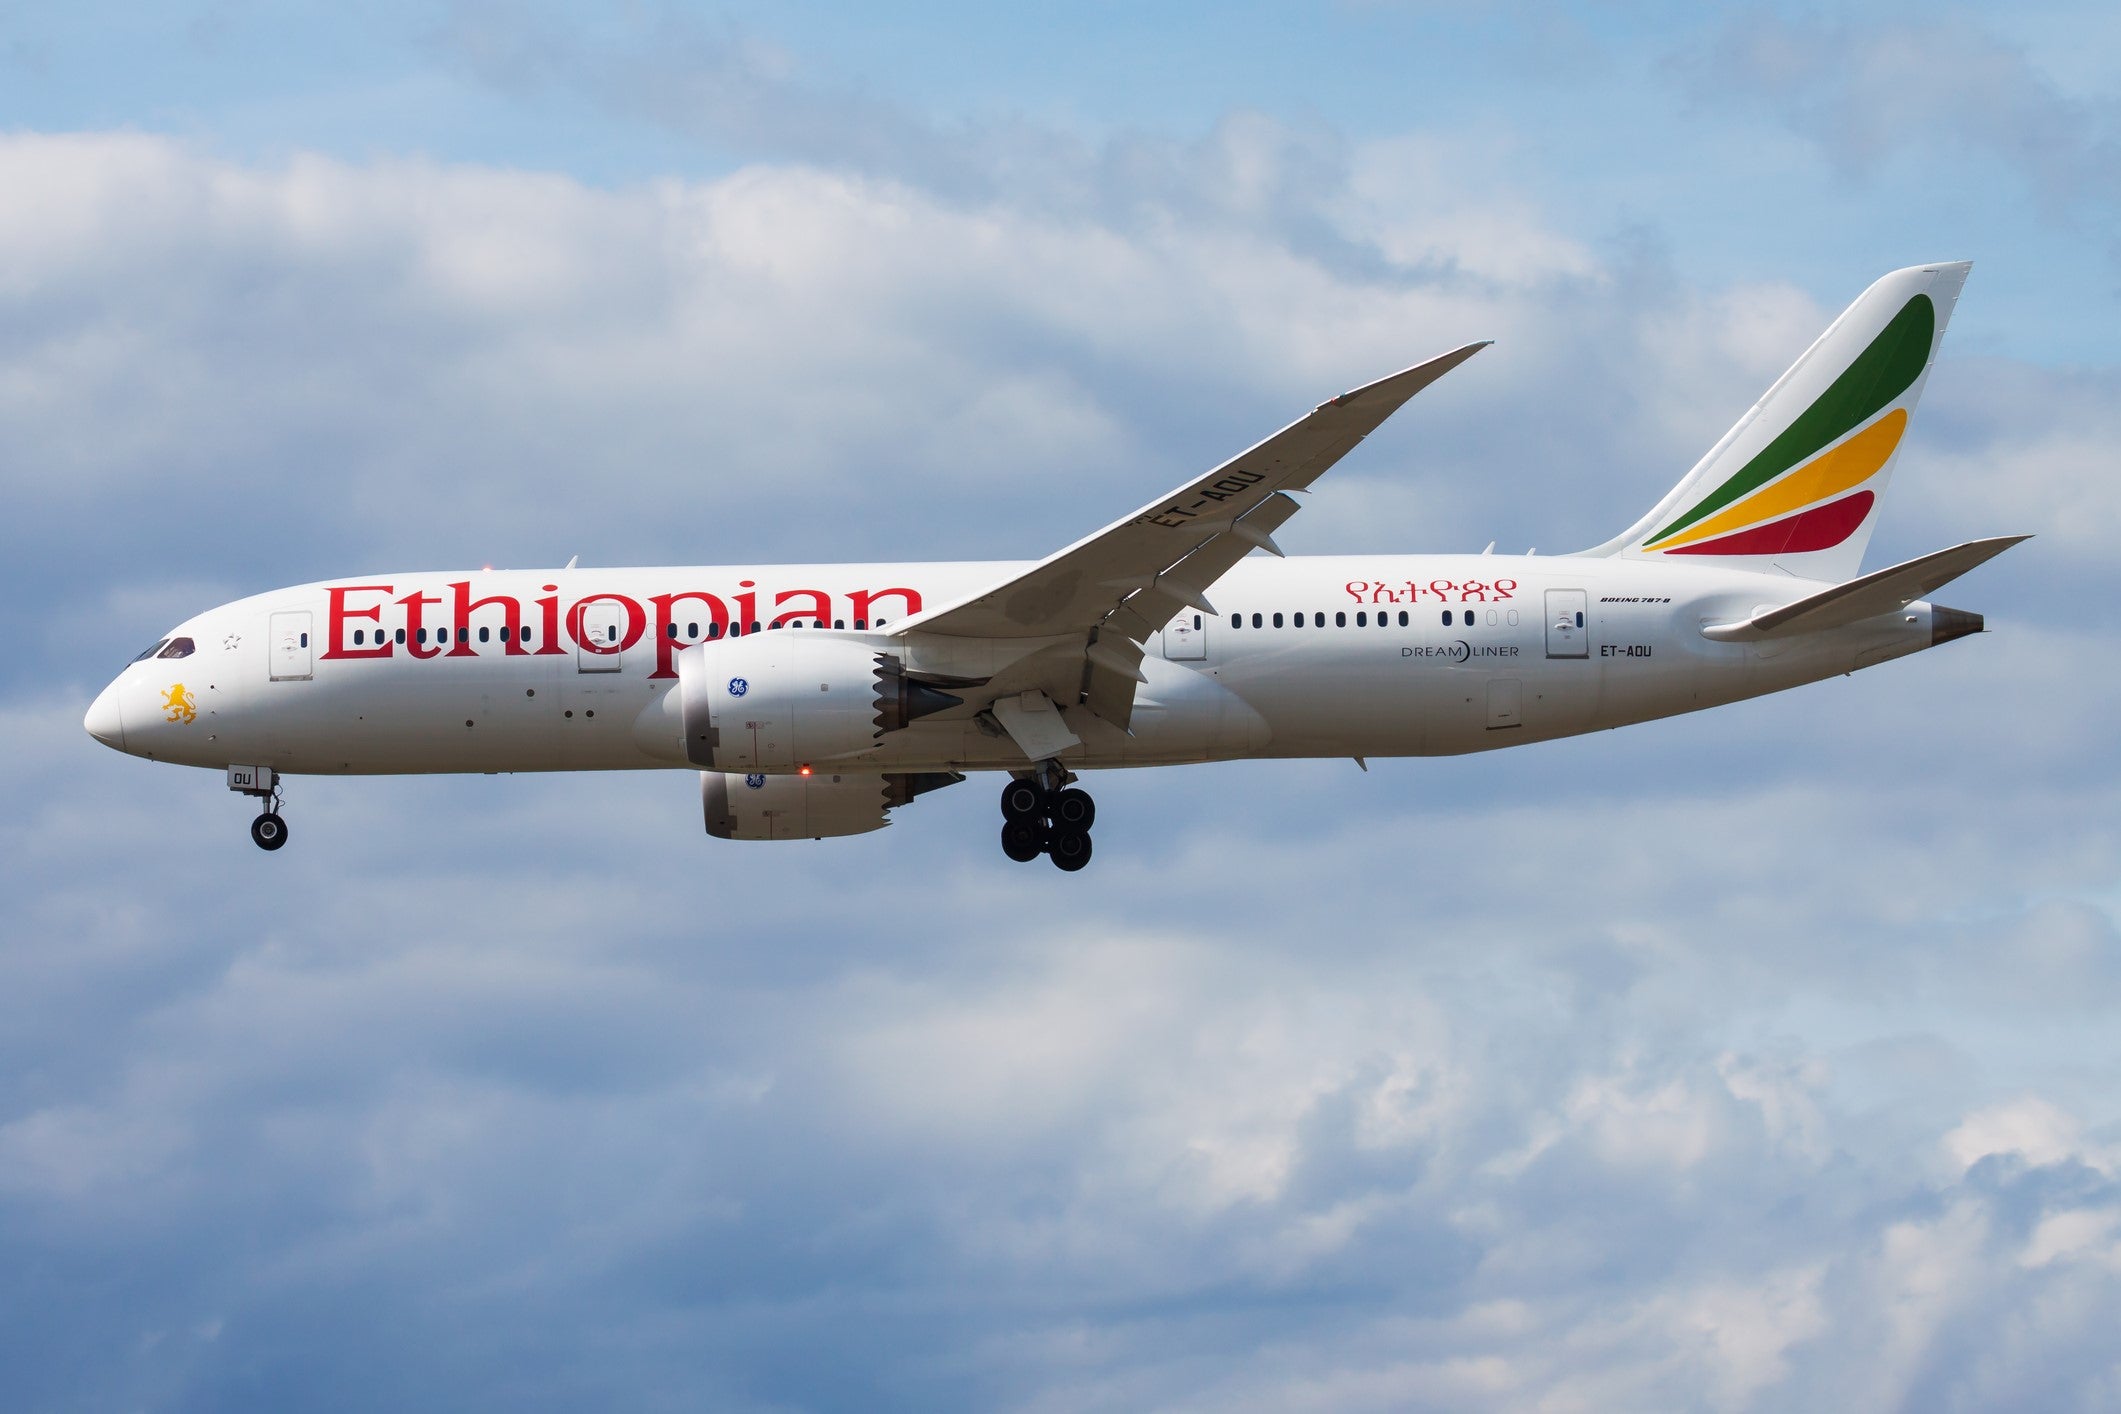 An Ethiopian Airlines plane made an emergency landing when one its engines caught fire